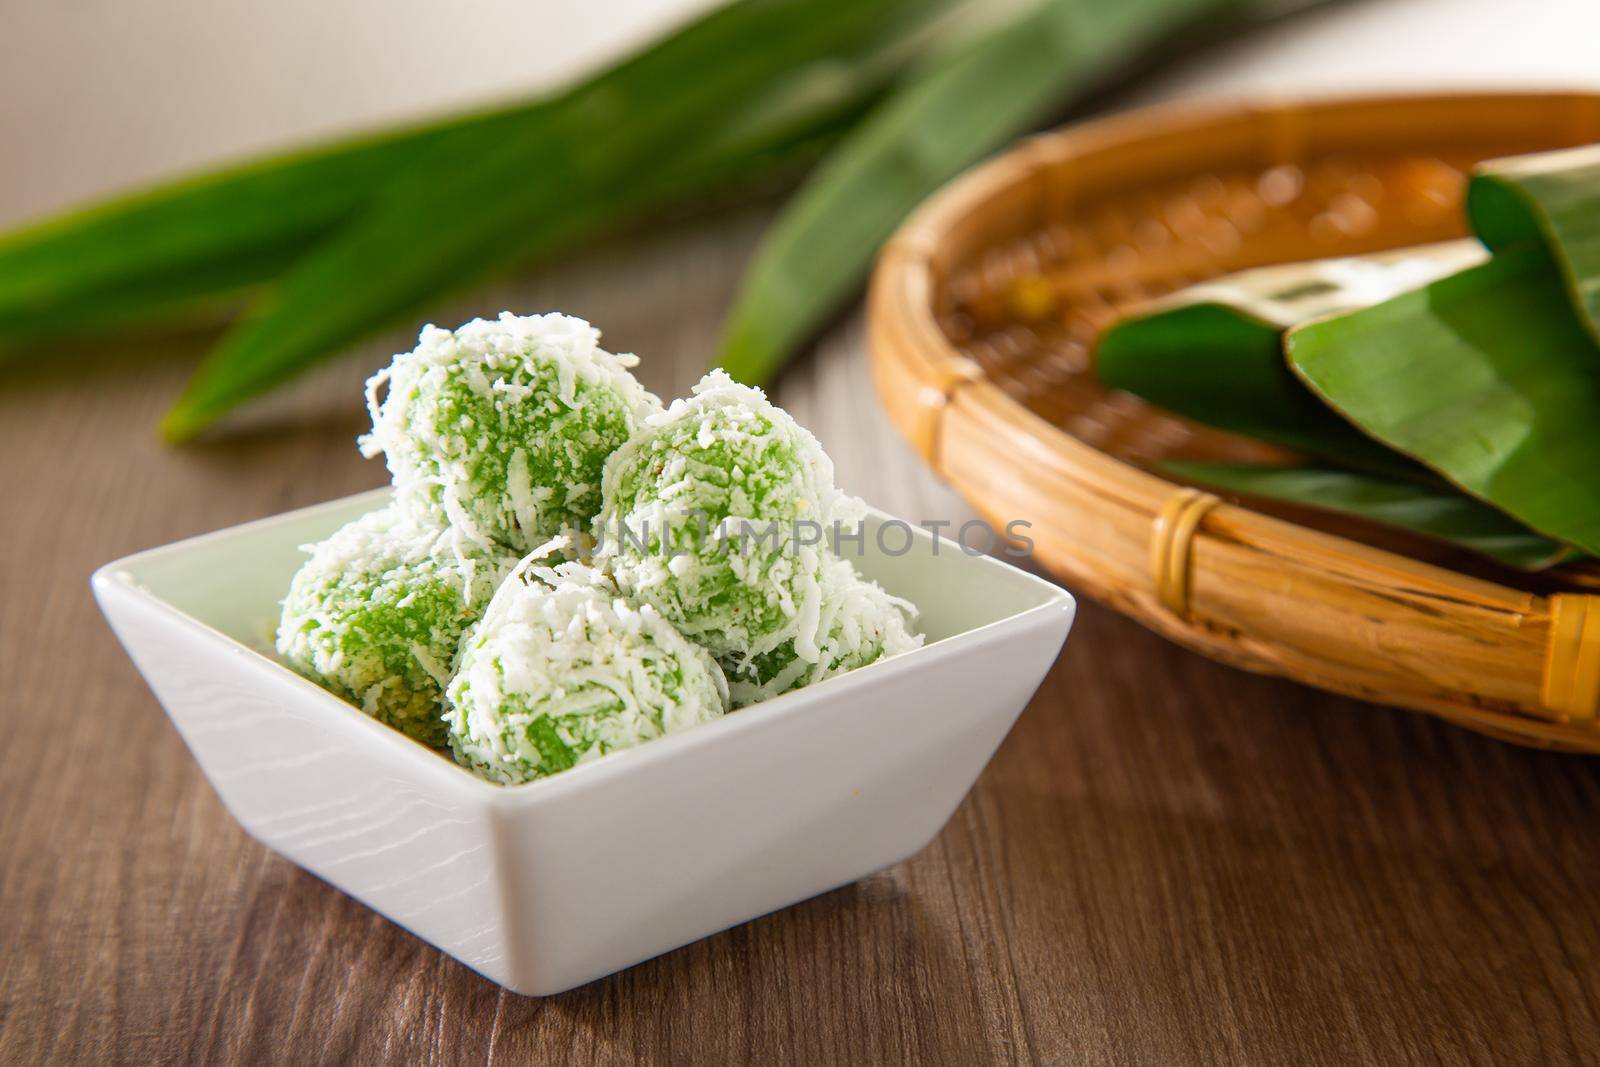 Ondeh ondeh is a traditional Malay snack made of rice ball filled with brown sugar, coated in grated coconut.